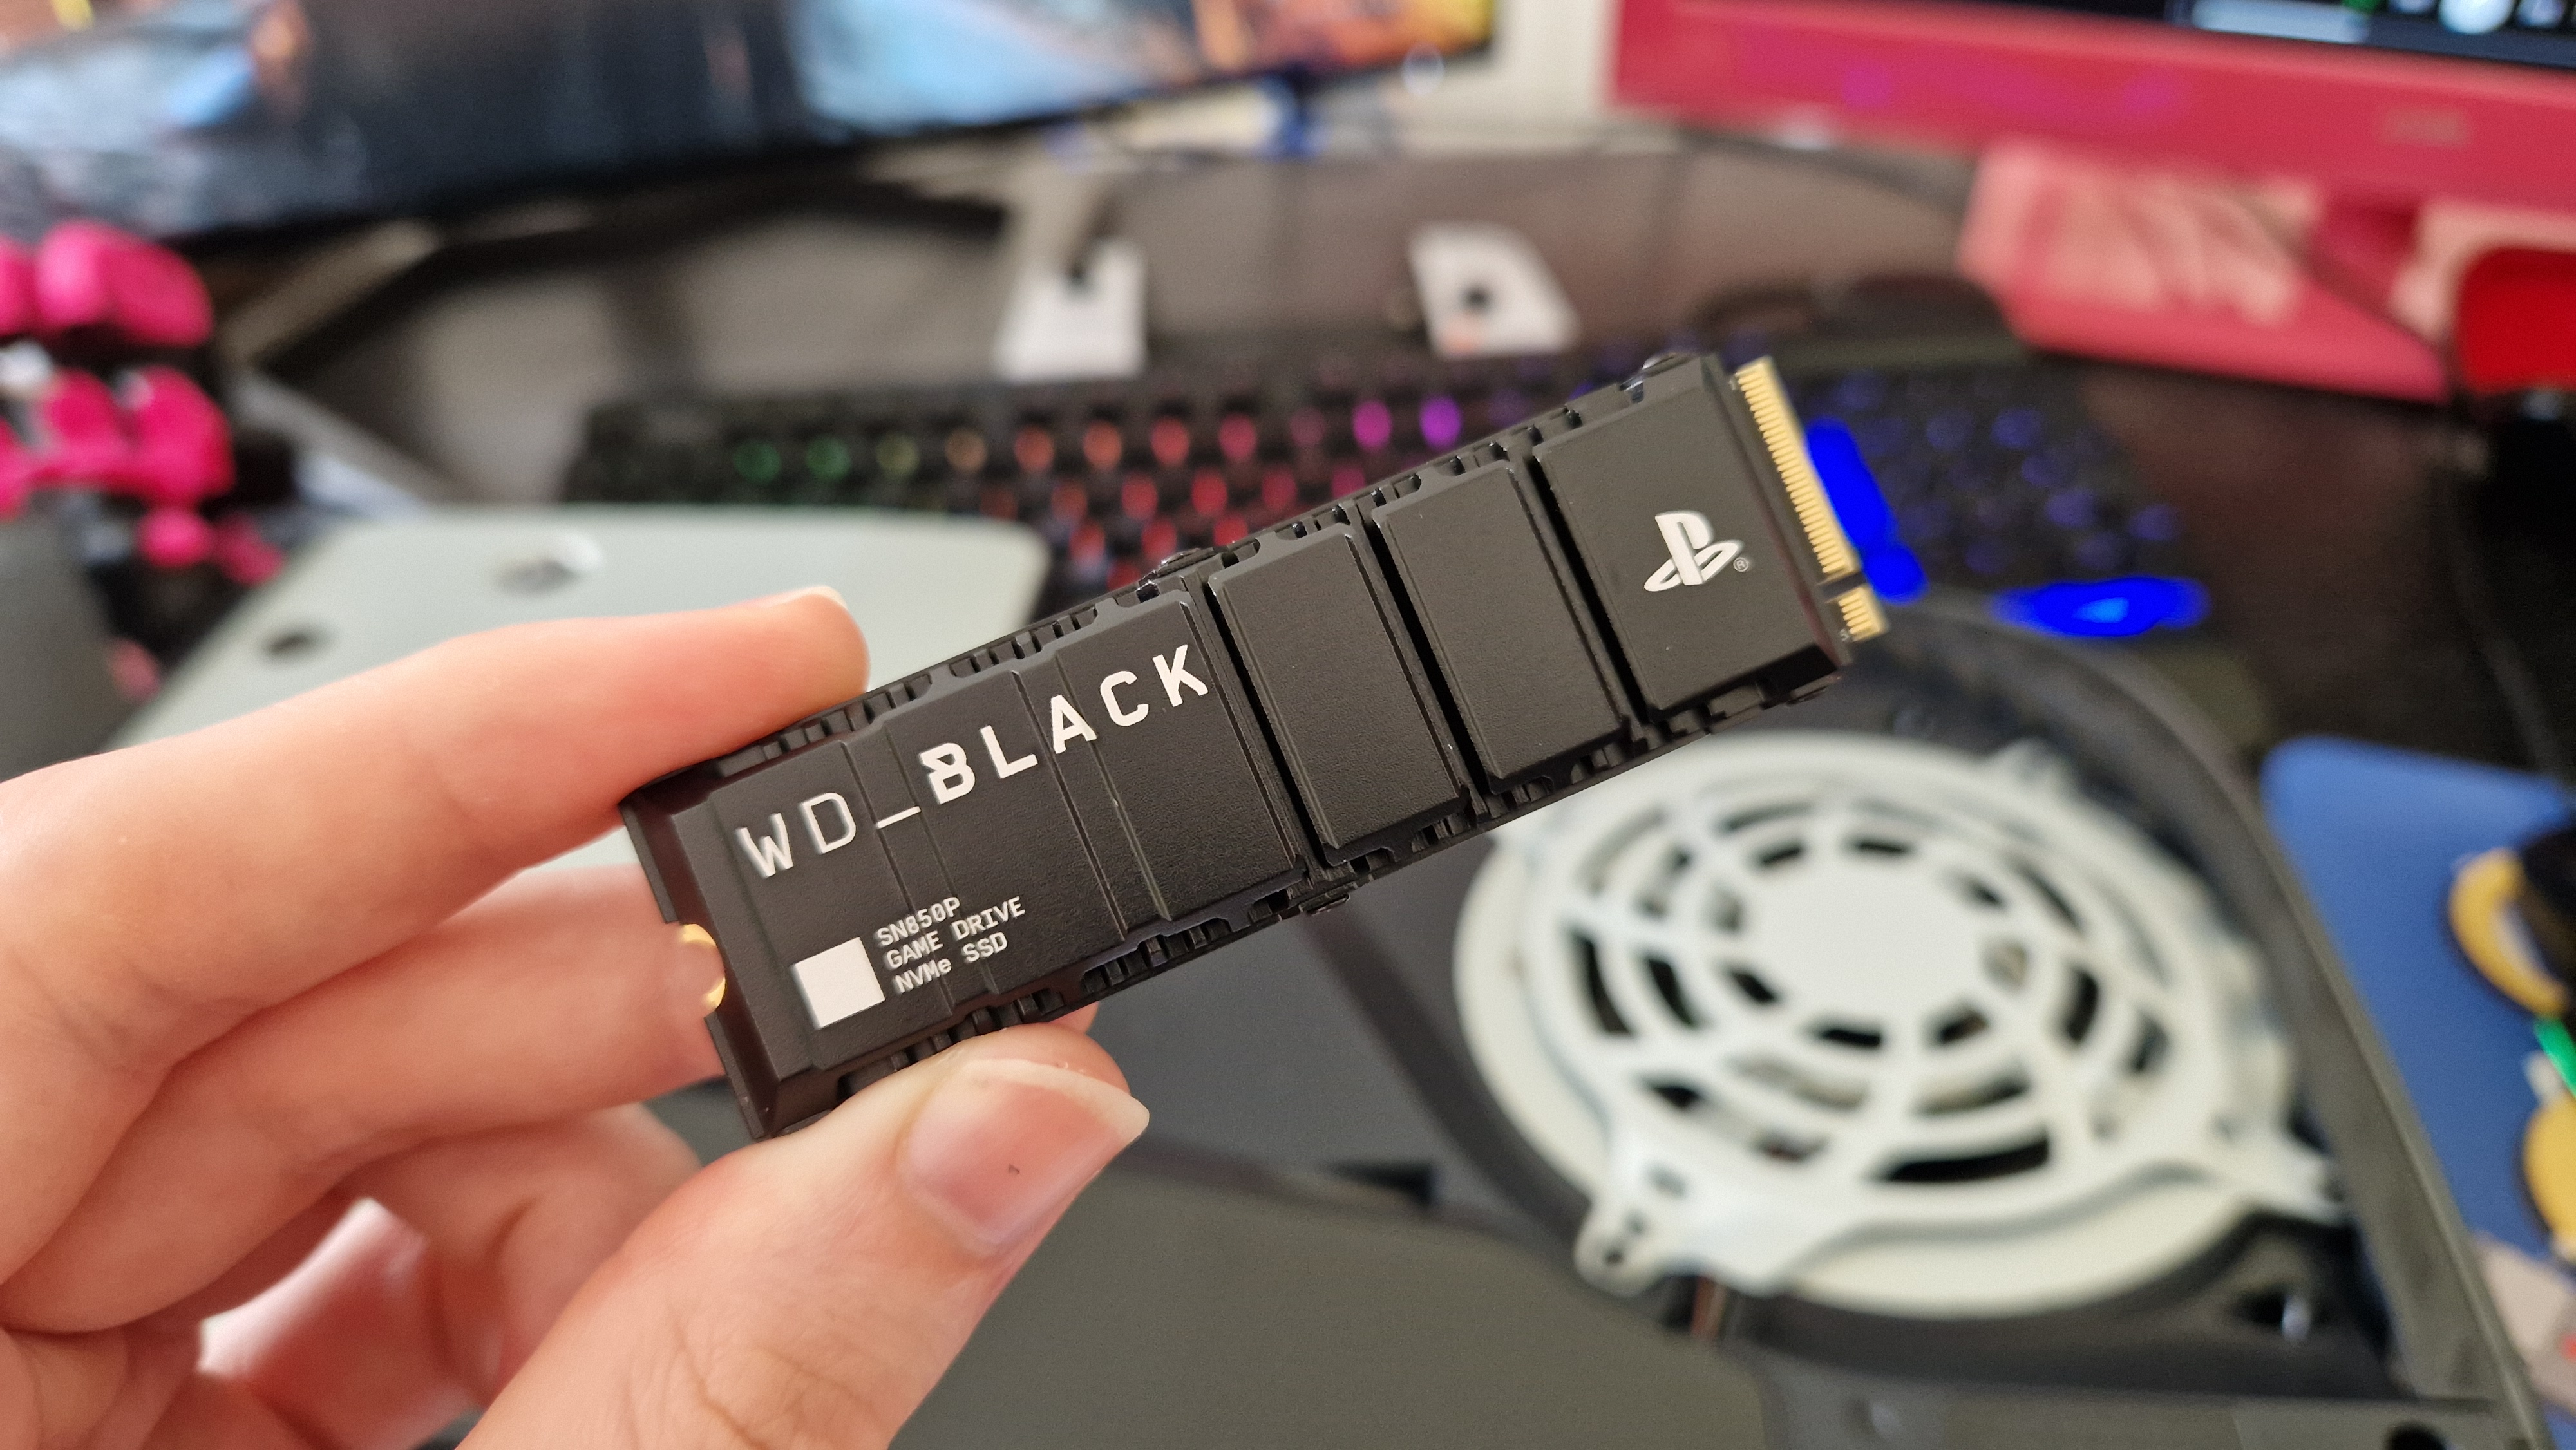 WD Black SN850P close up in the hand